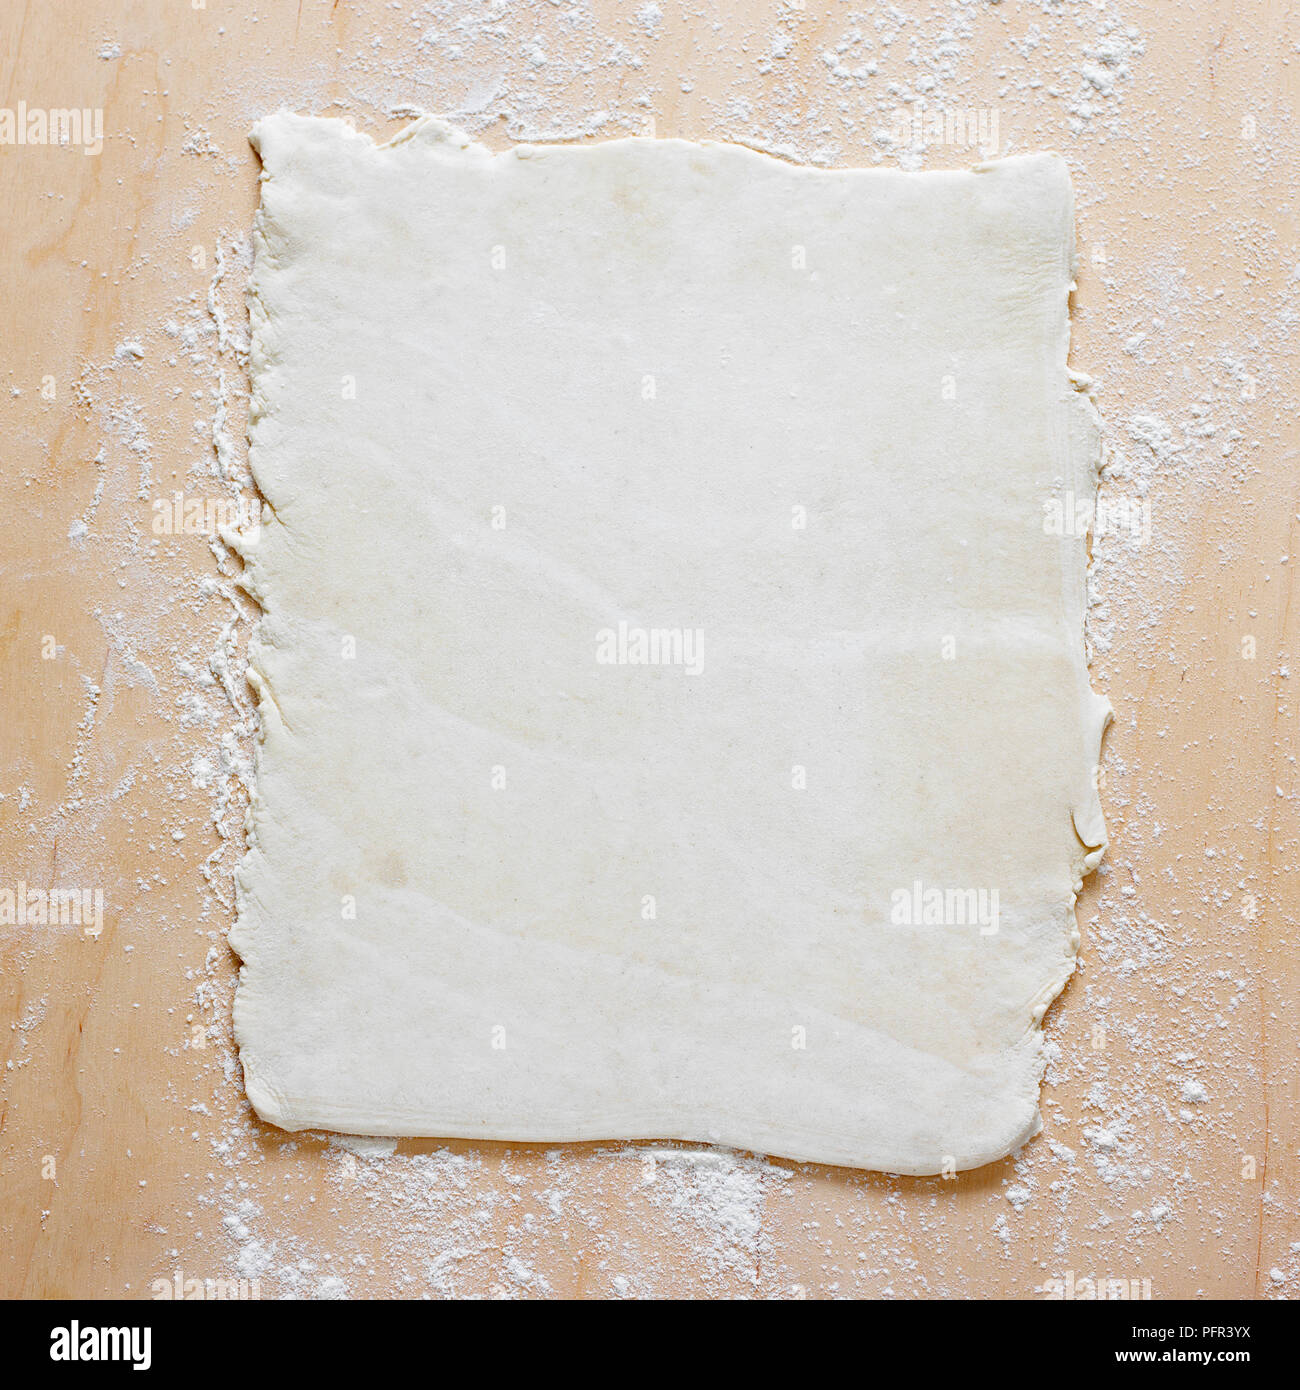 Pastry dough rolled out on floured surface Stock Photo